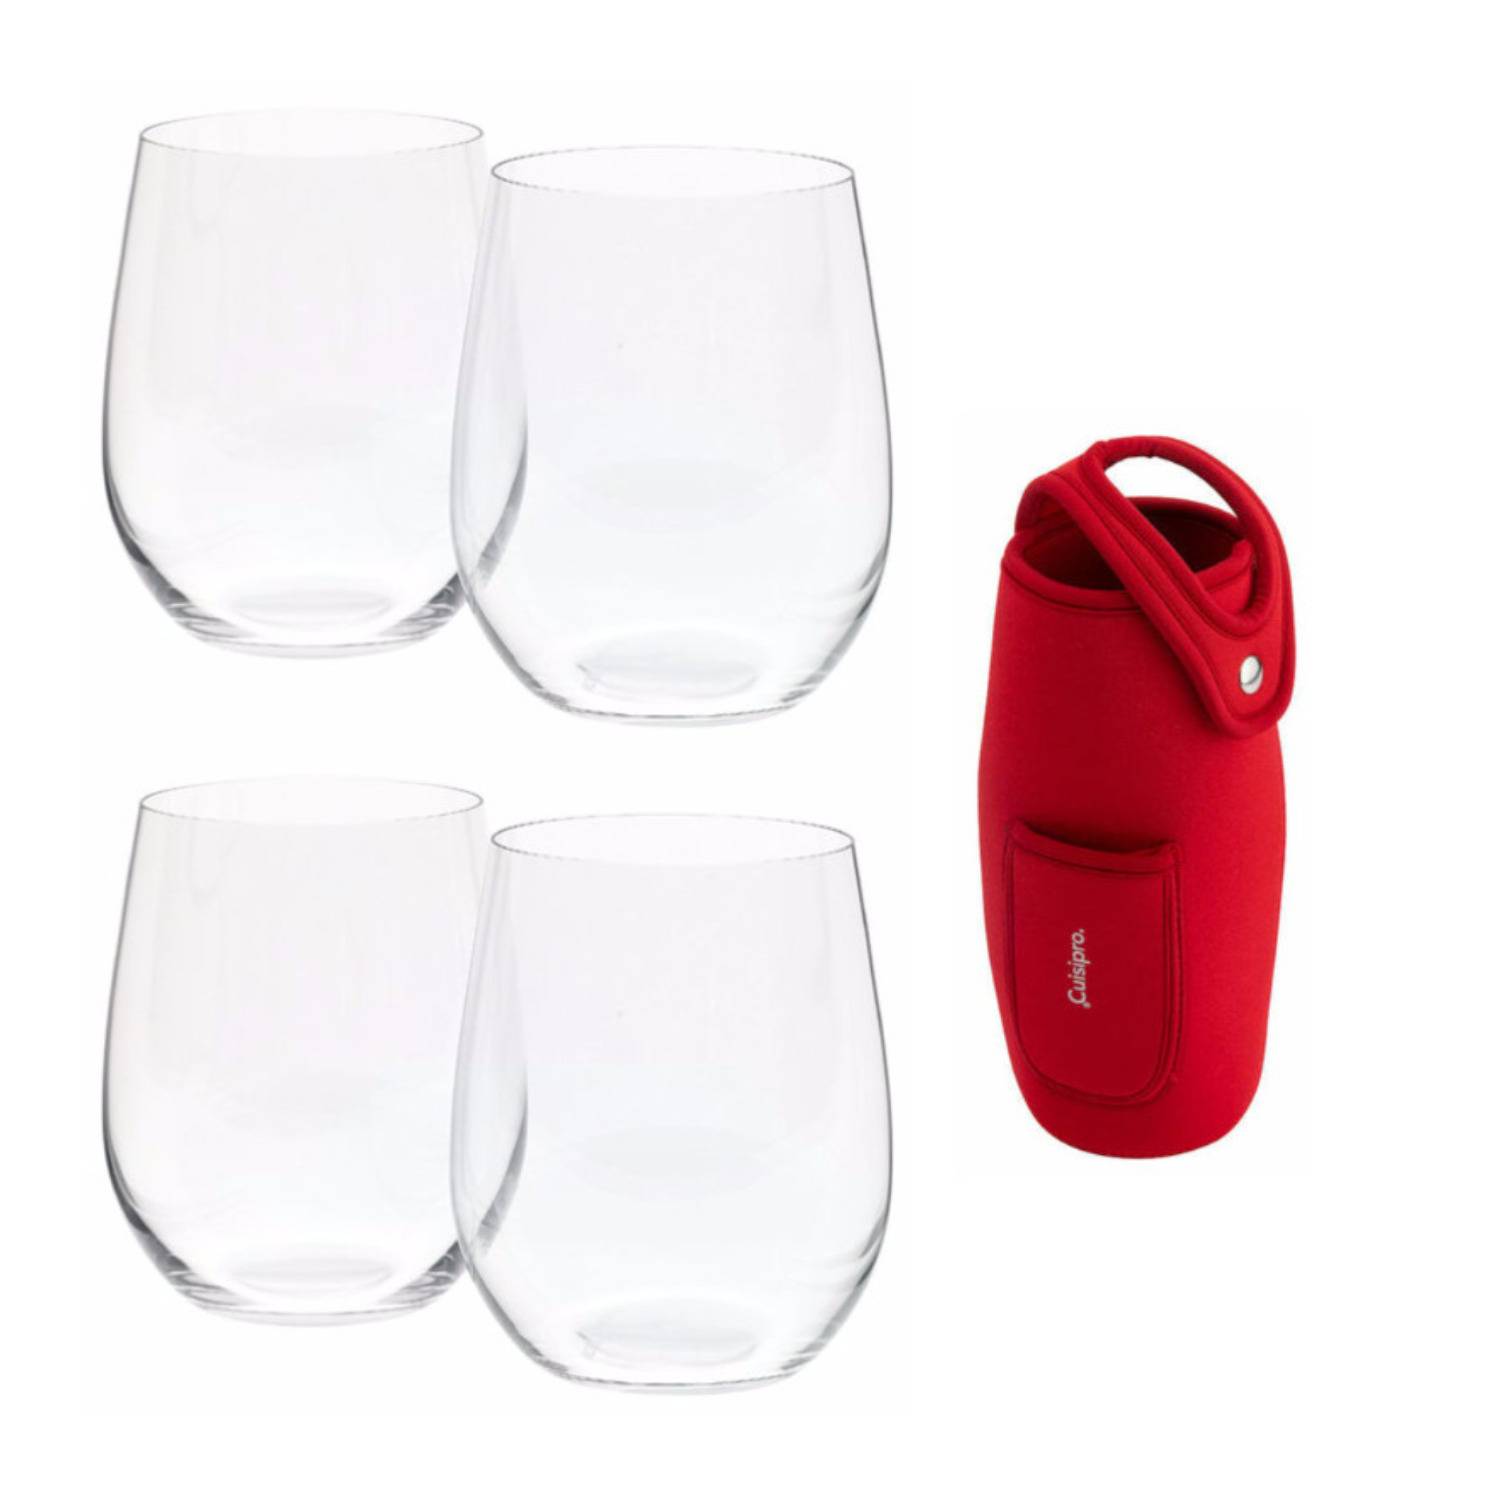 Riedel O Chardonnay/Viognier Wine Tumblers (2-Pack) w/Wine Bottle Holder (Red)